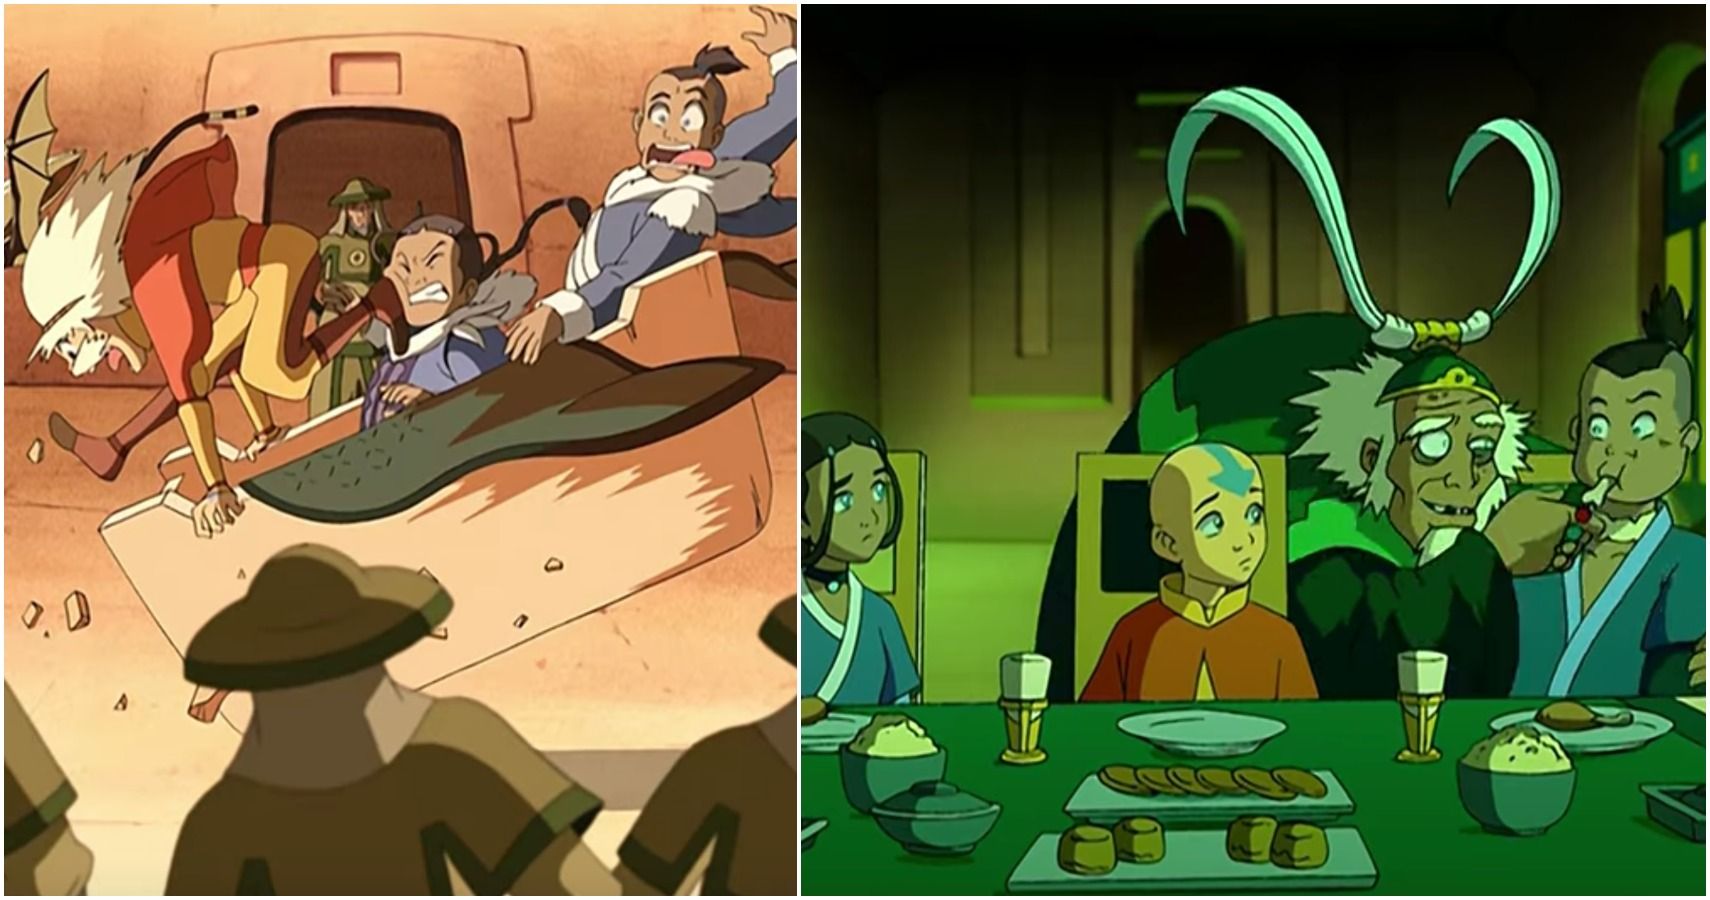 The King of Omashu episode of Avatar the Last Airbender.